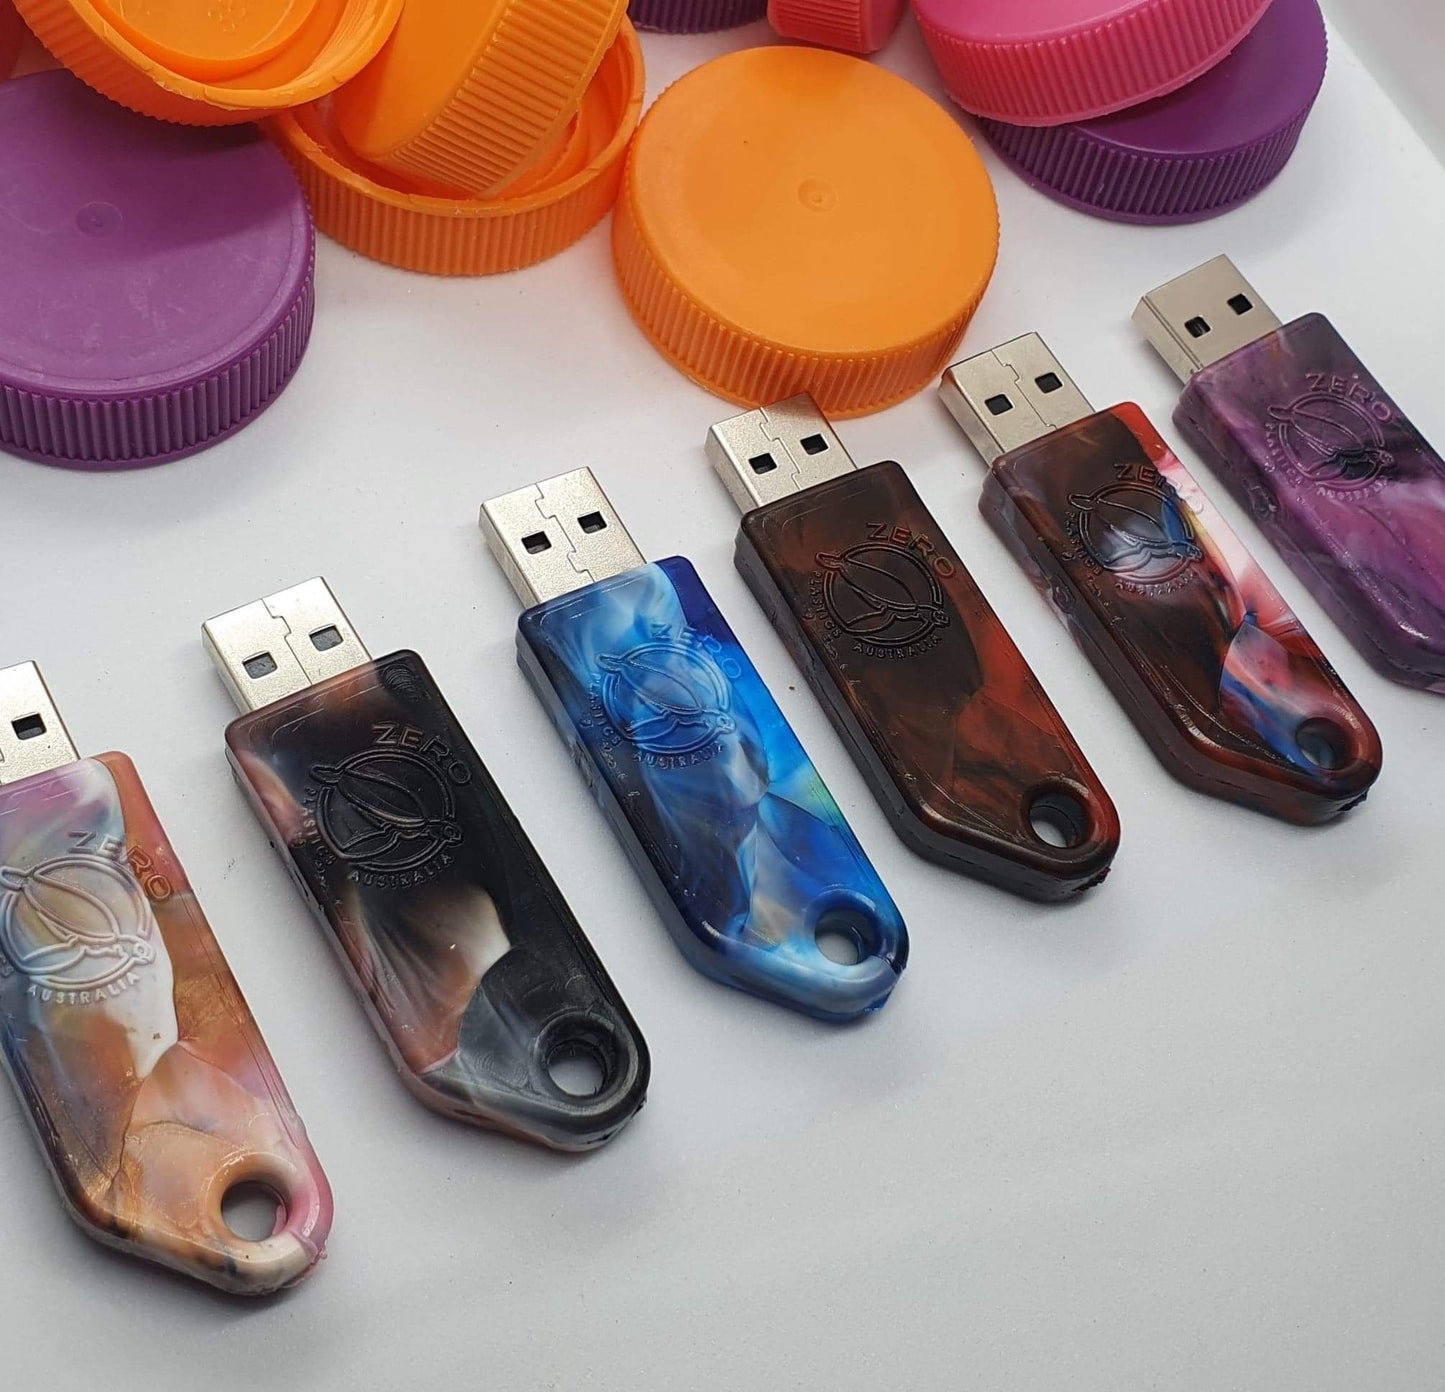 Recycled Plastic Flash Drive